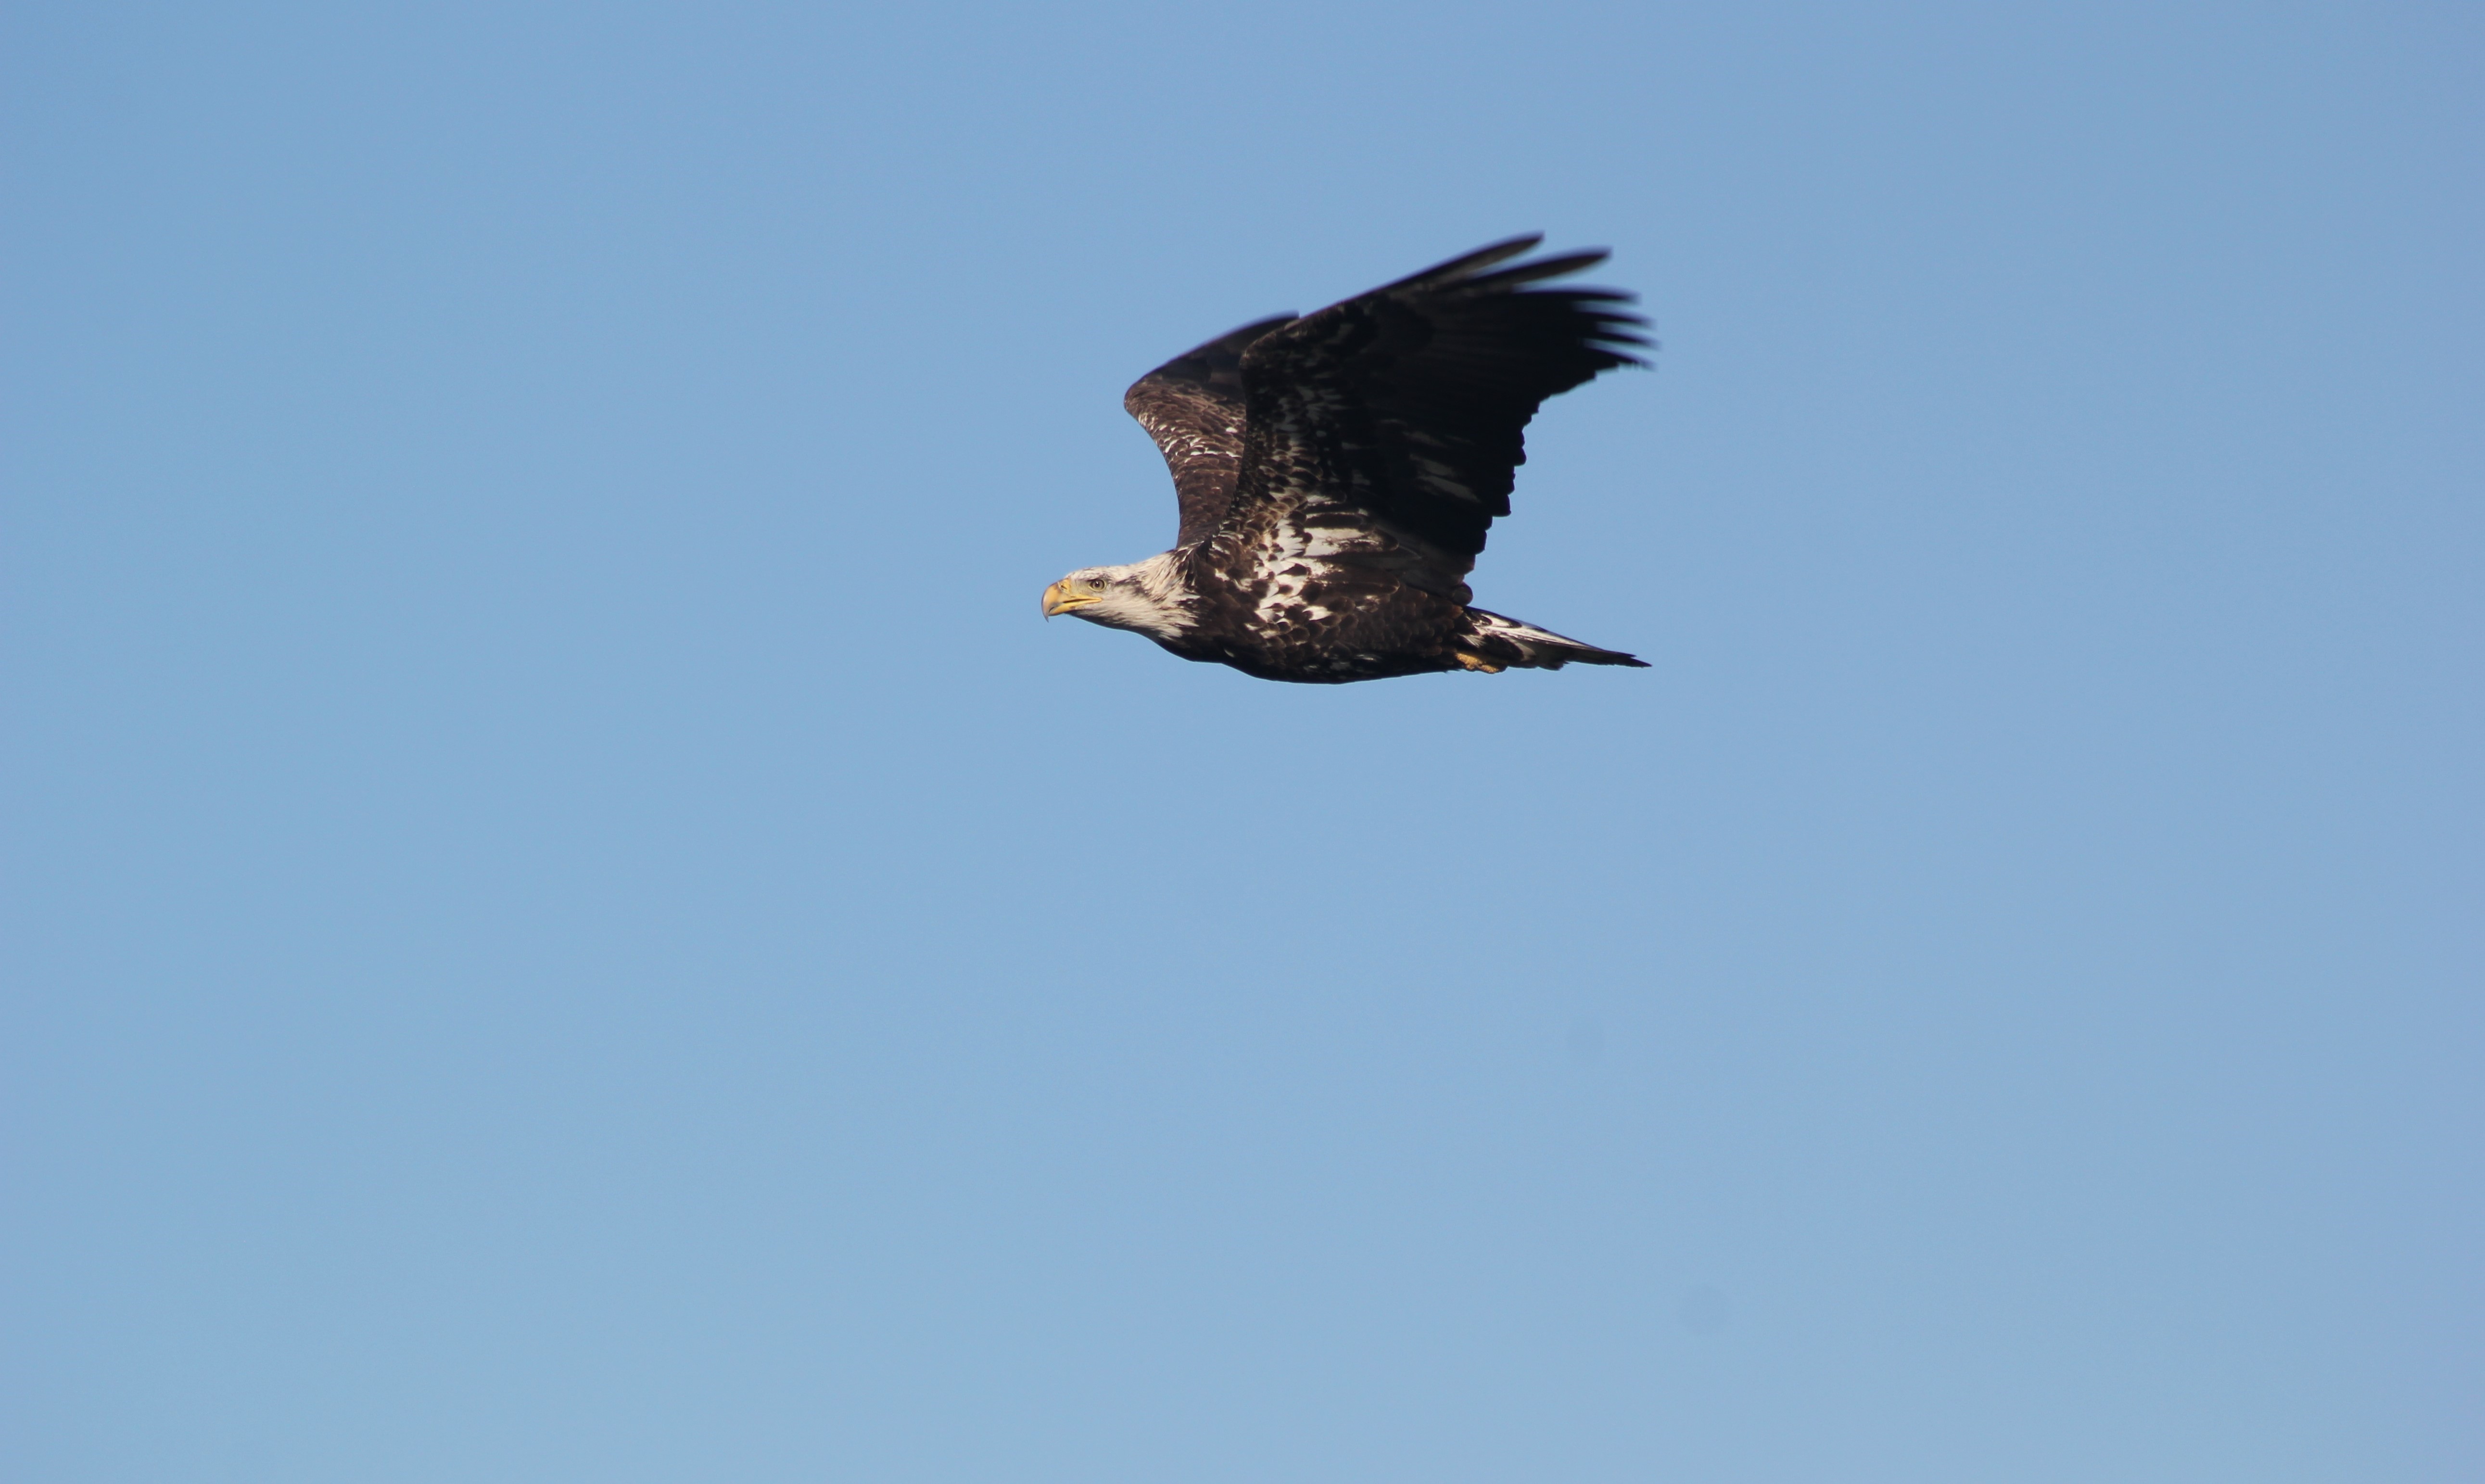 Bald eagle in flight against a clear blue sky 